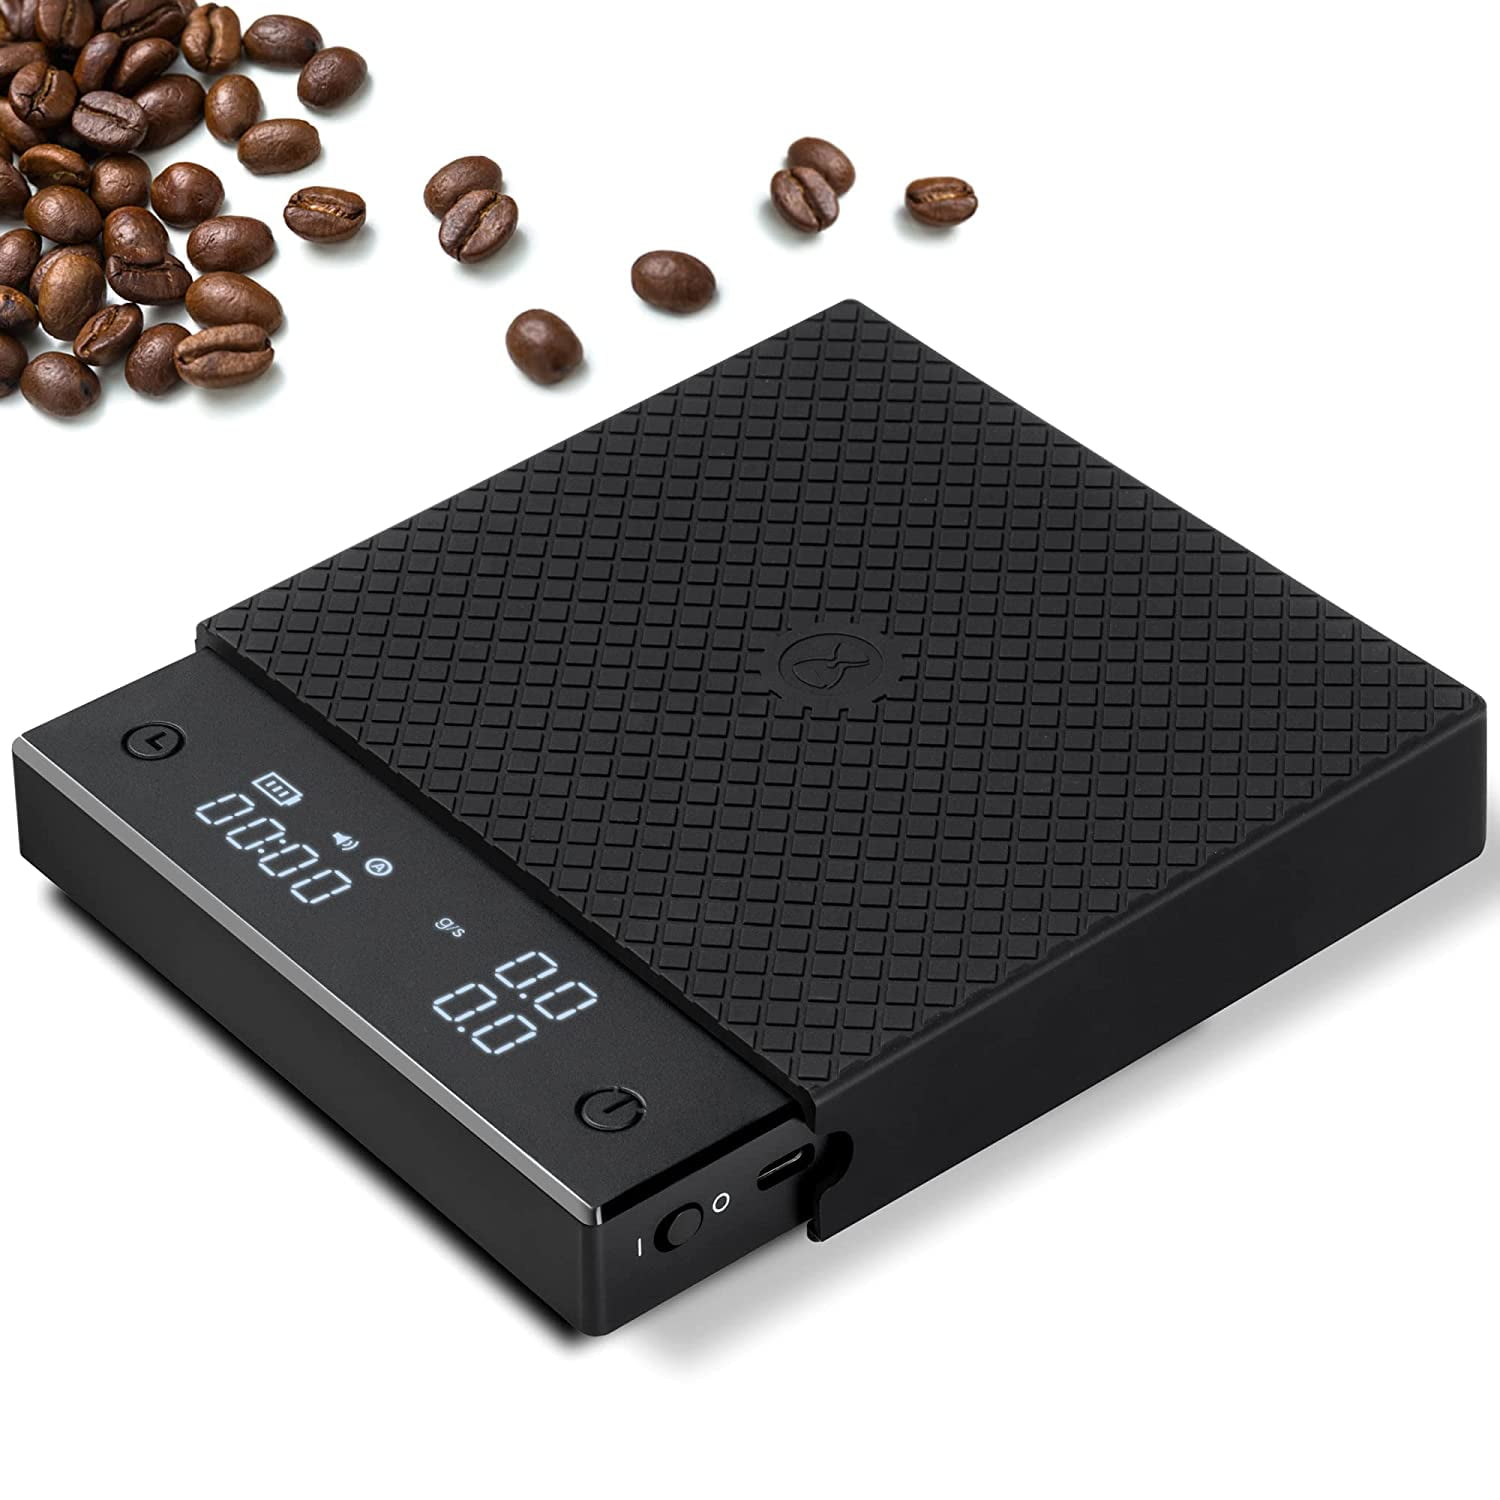 TIMEMORE Coffee Scale, Espresso Scale,Weigh Digital Coffee Scale with  Timer,2000 Grams(Black)